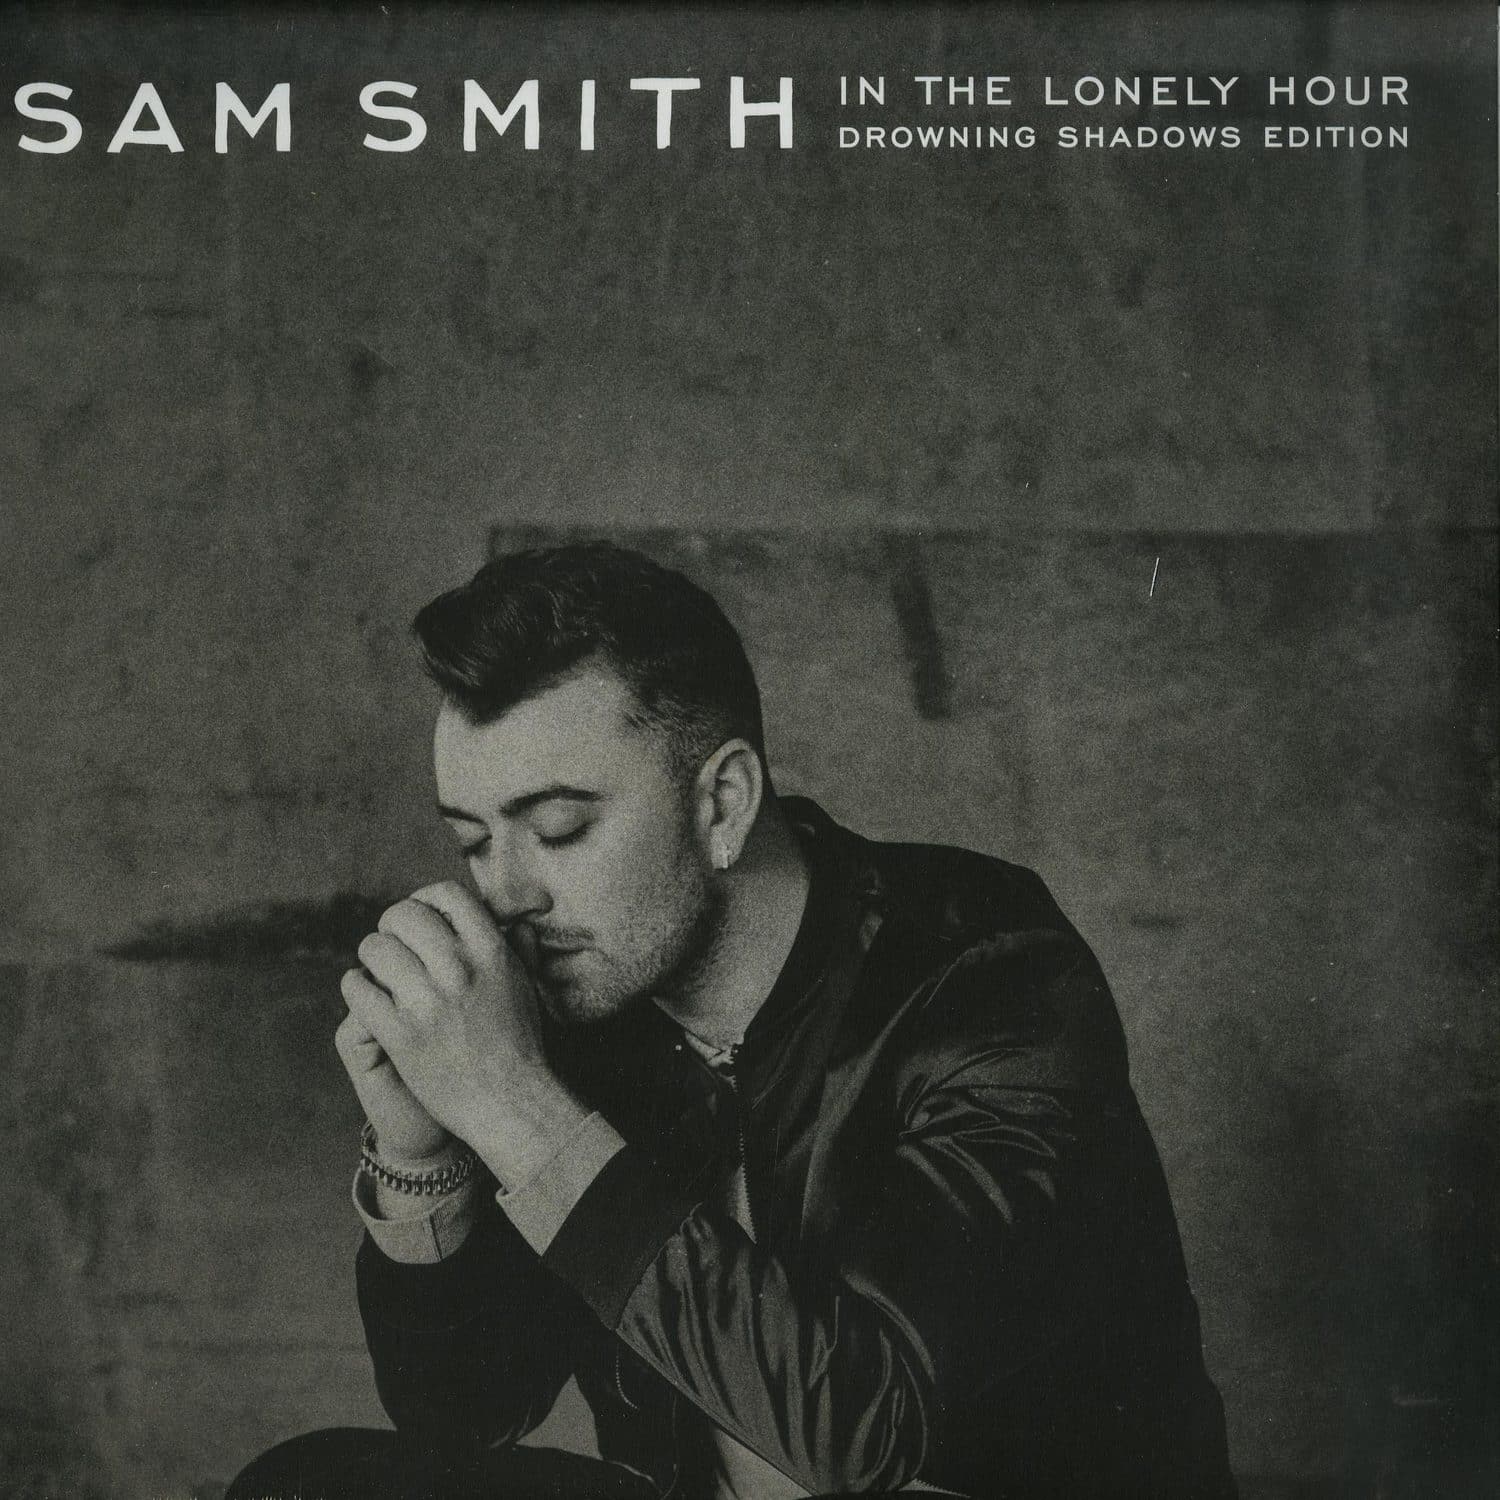 Sam Smith - IN THE LONELY HOUR: DROWNING SHADOWS EDITION 